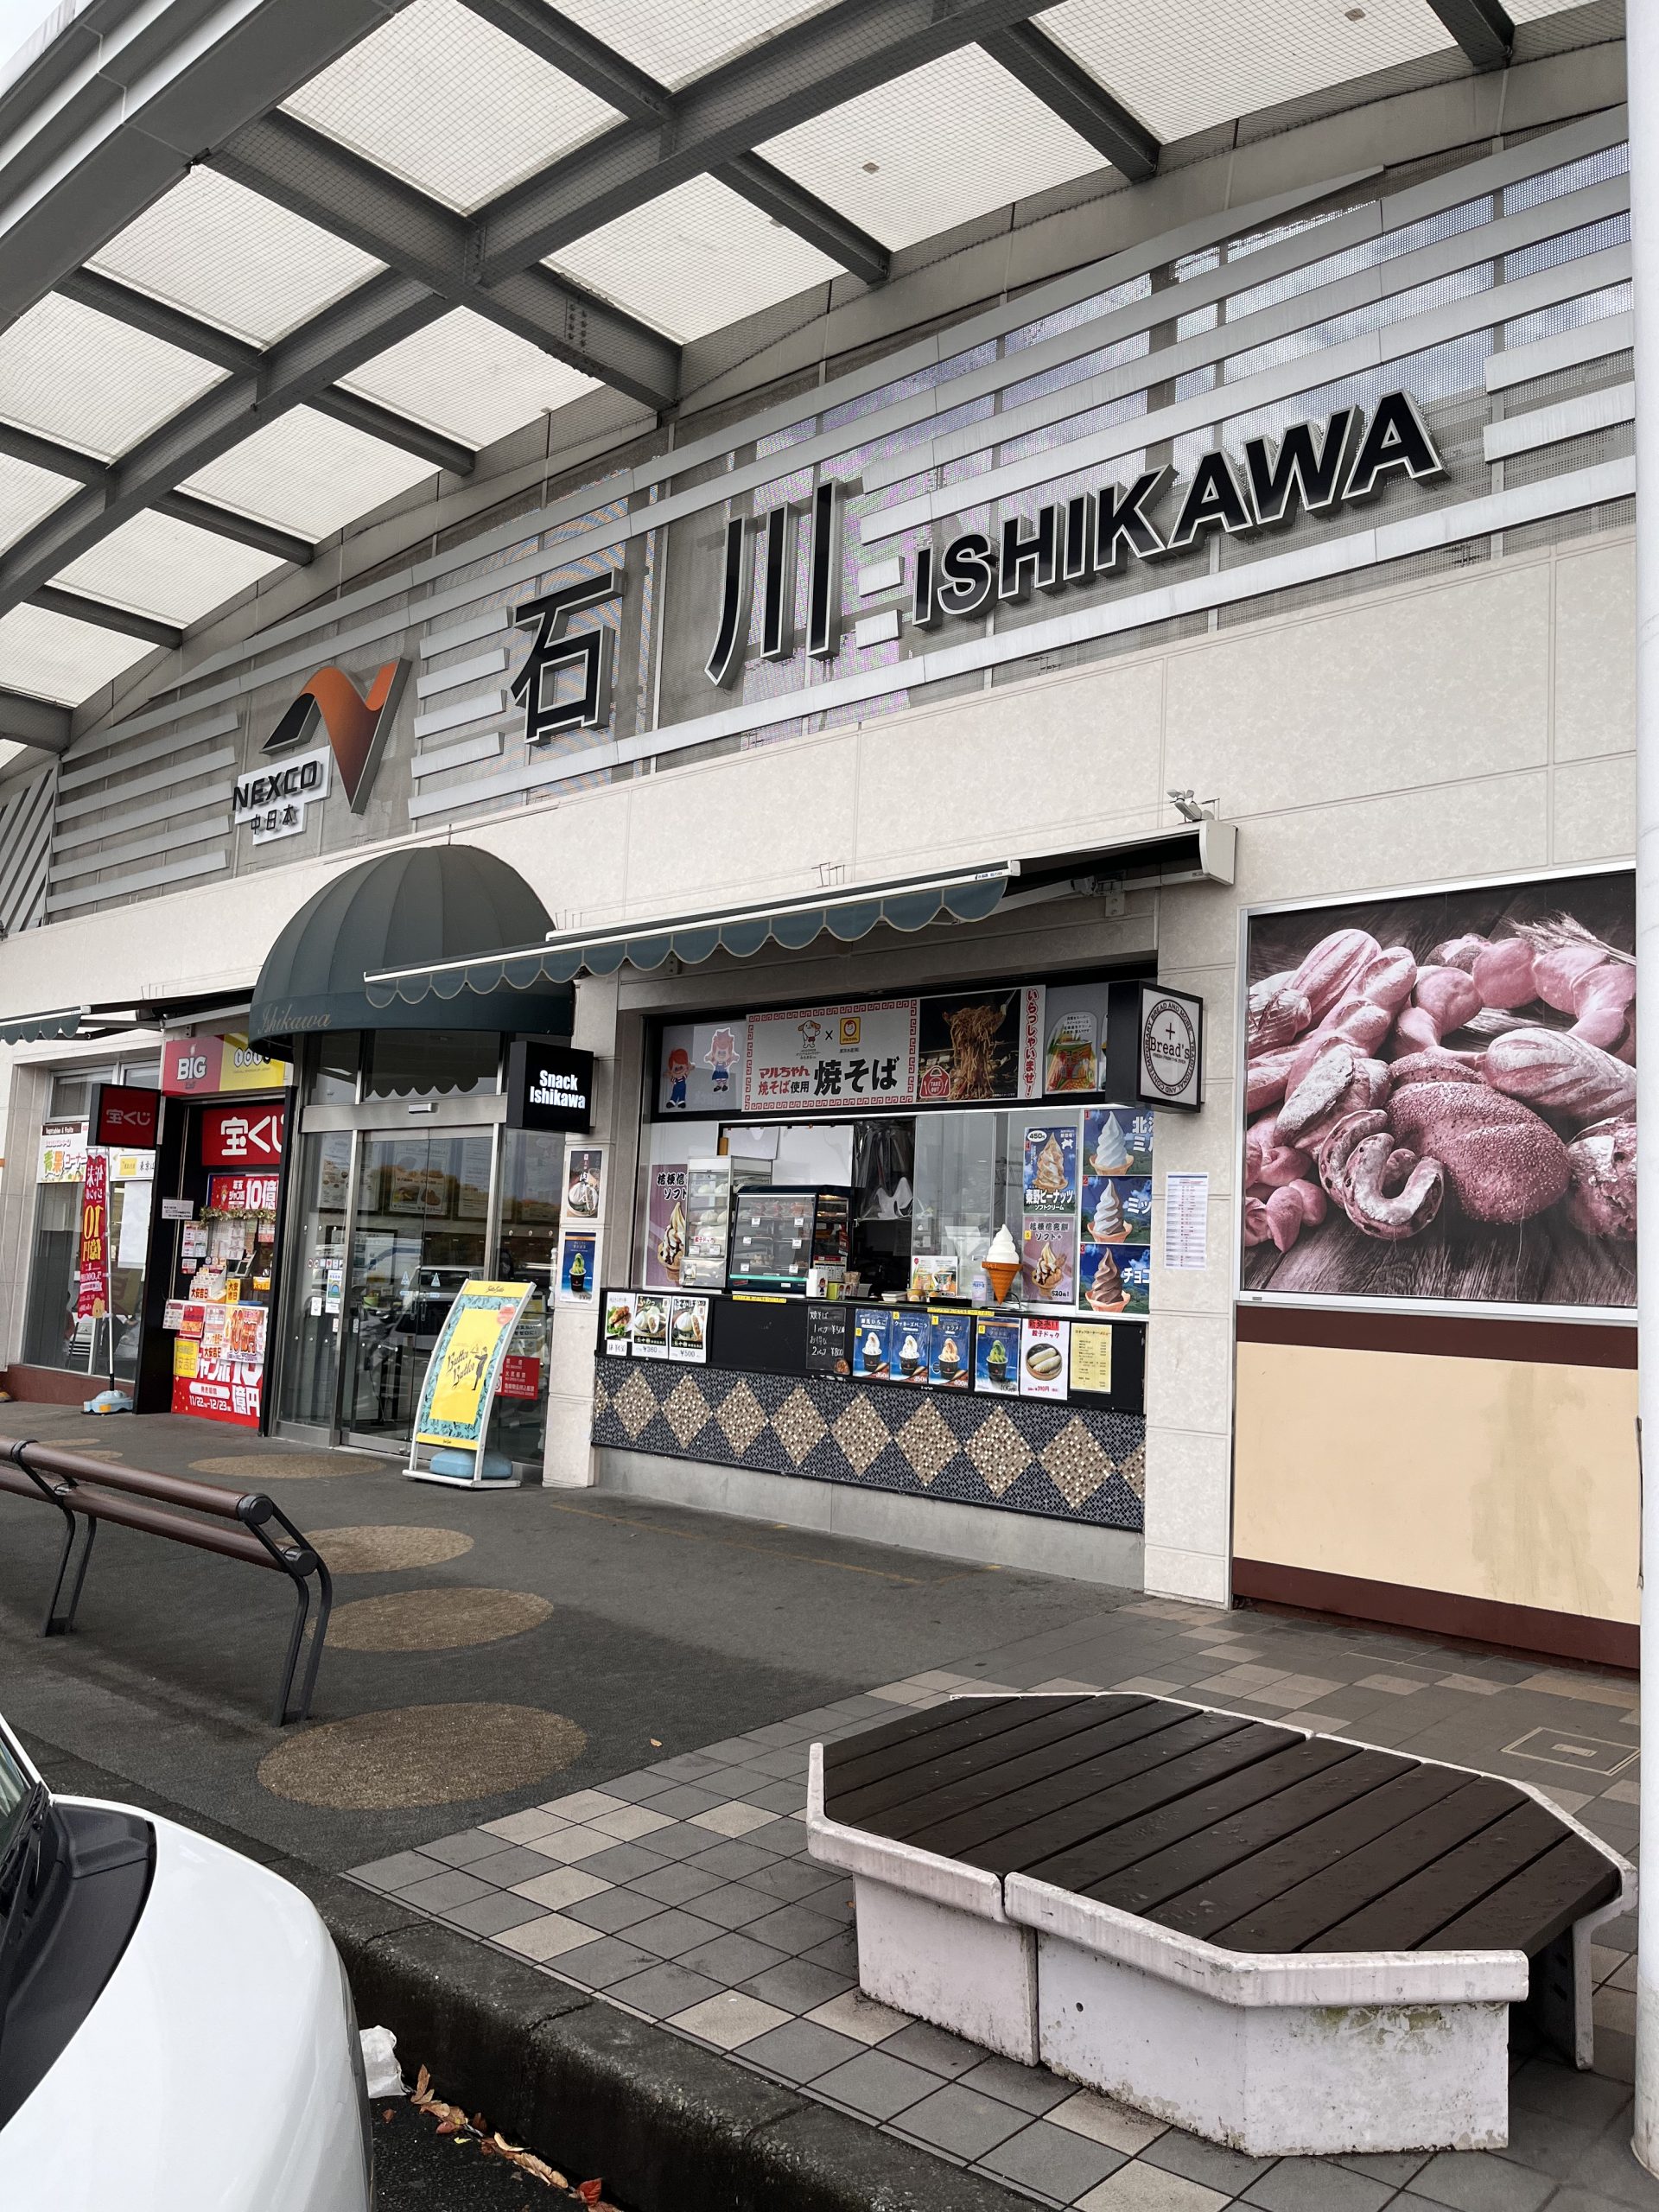 Entrance to a service station on expressway in Japan